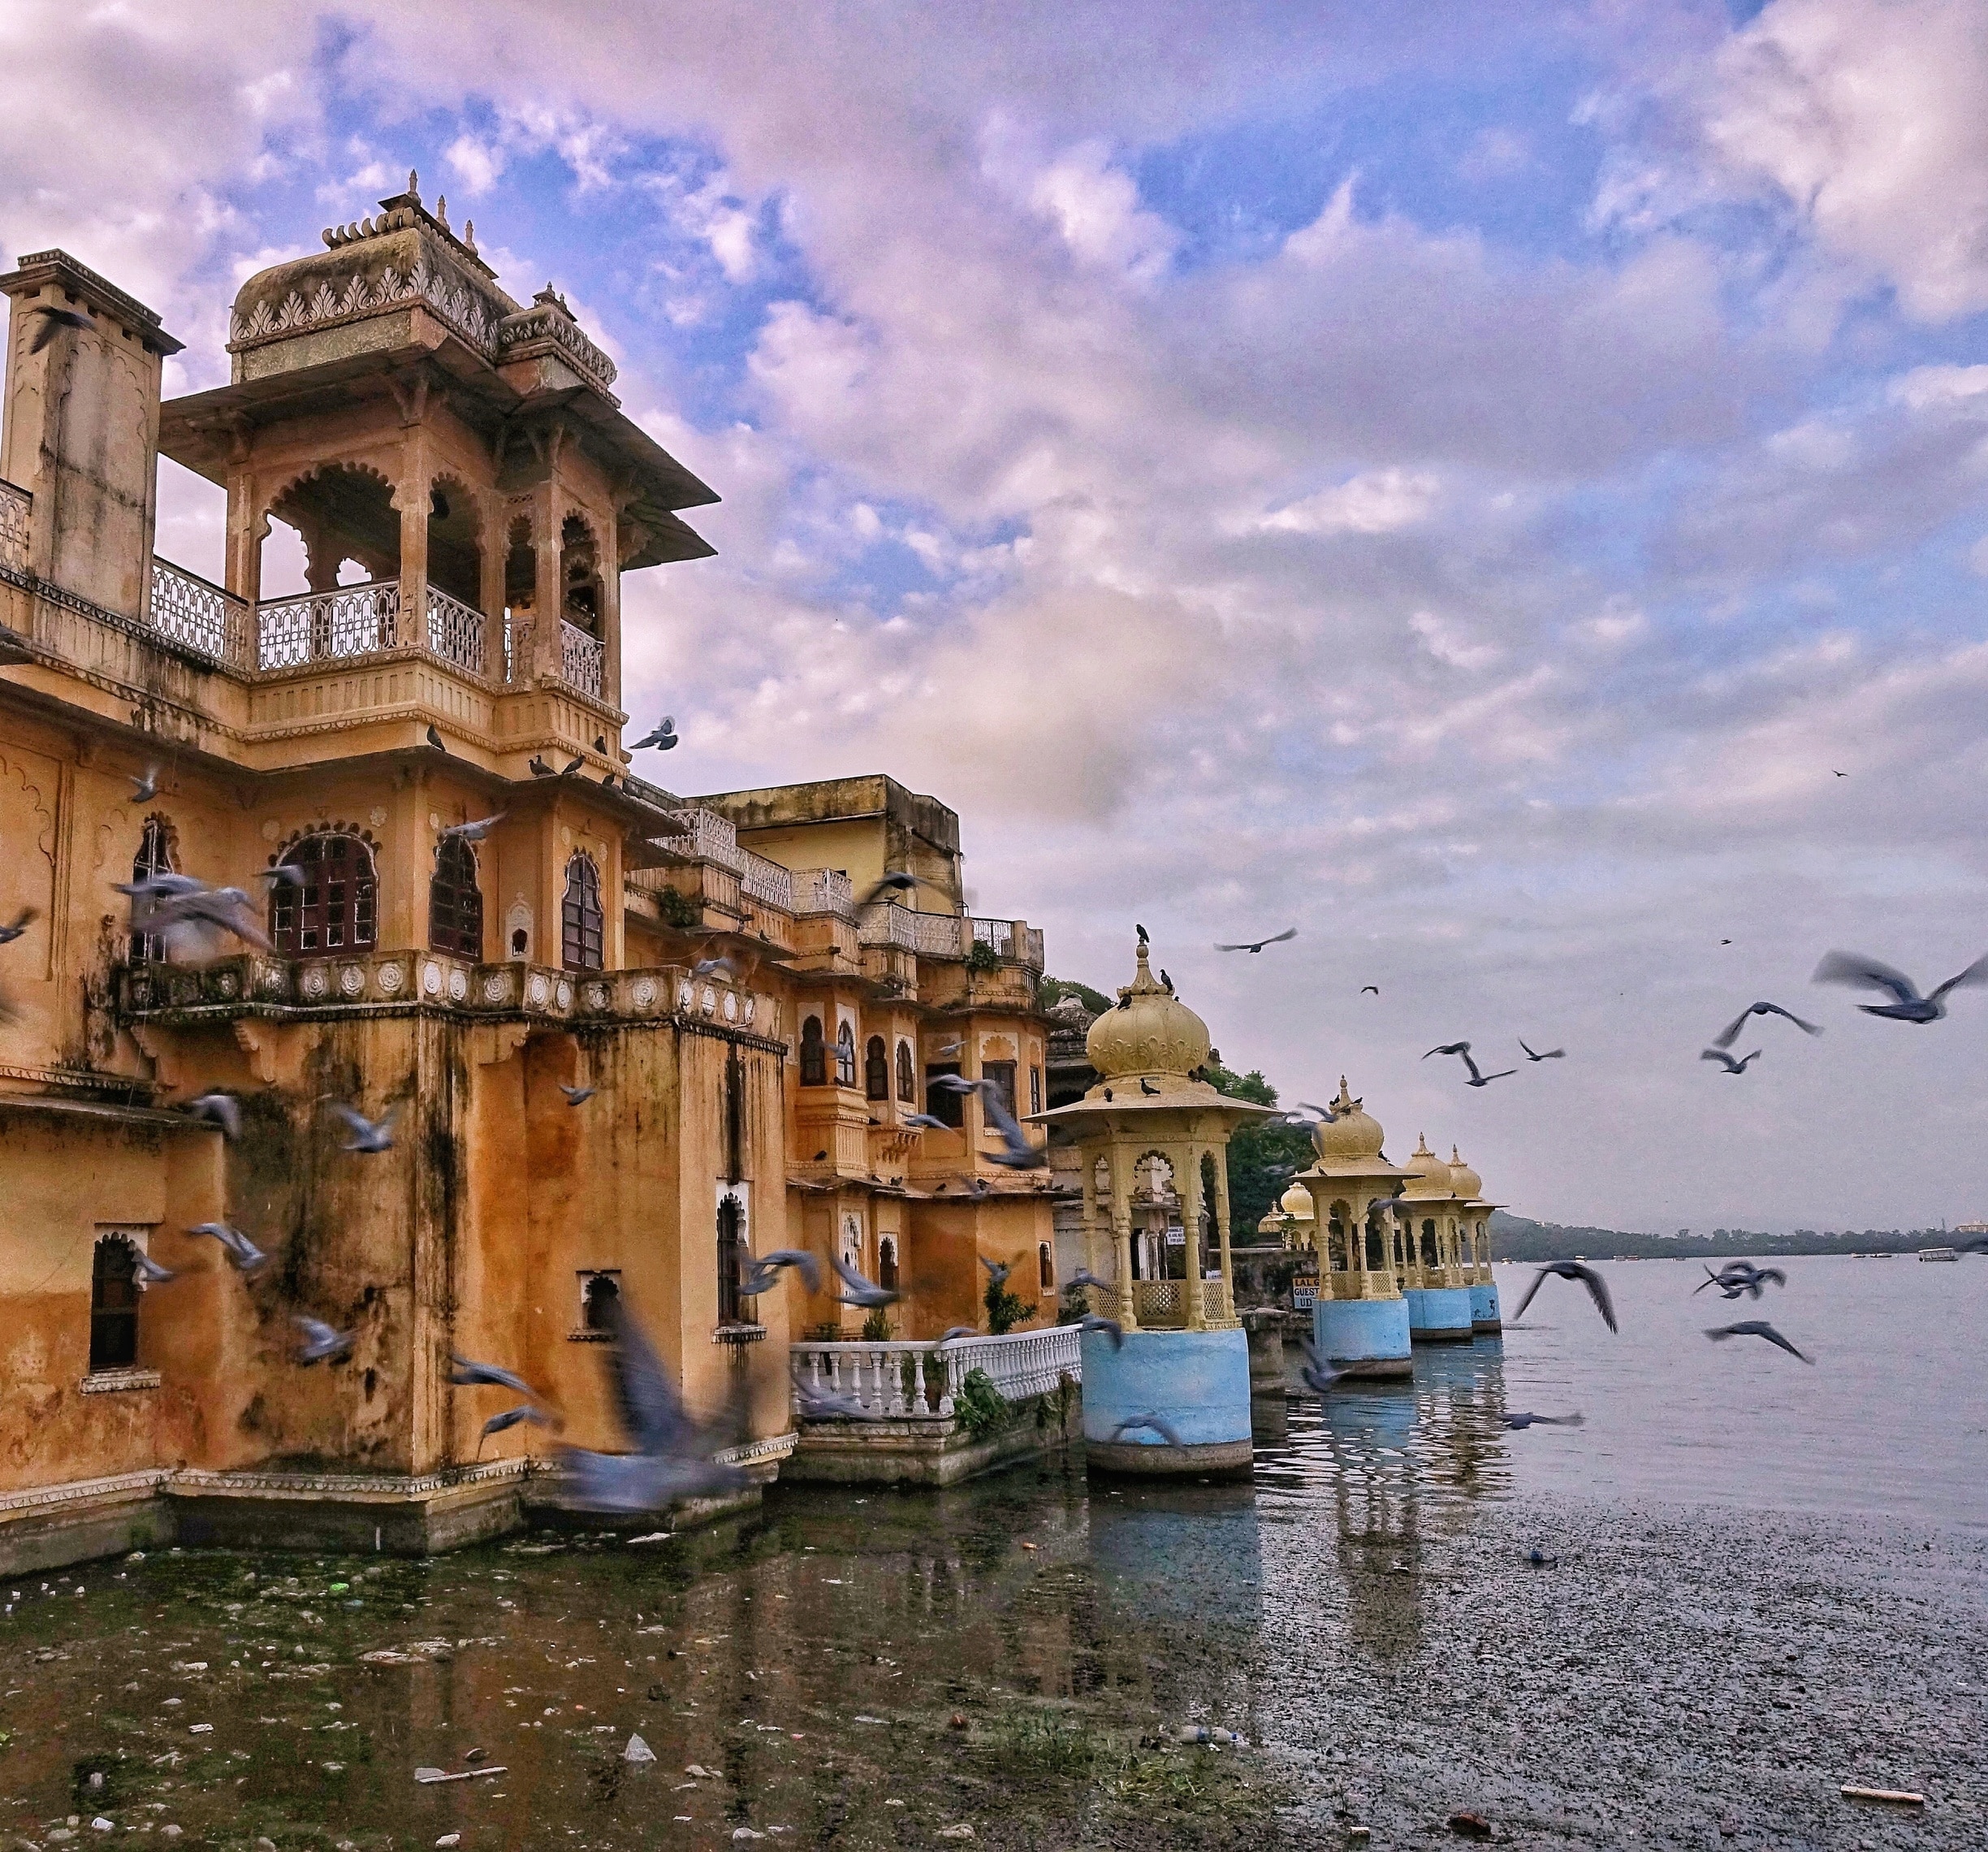 Take an early morning walk at Gangaur Ghat and witness a peaceful Udaipur.

#Udaipur #Rajasthan #IncredibleIndia